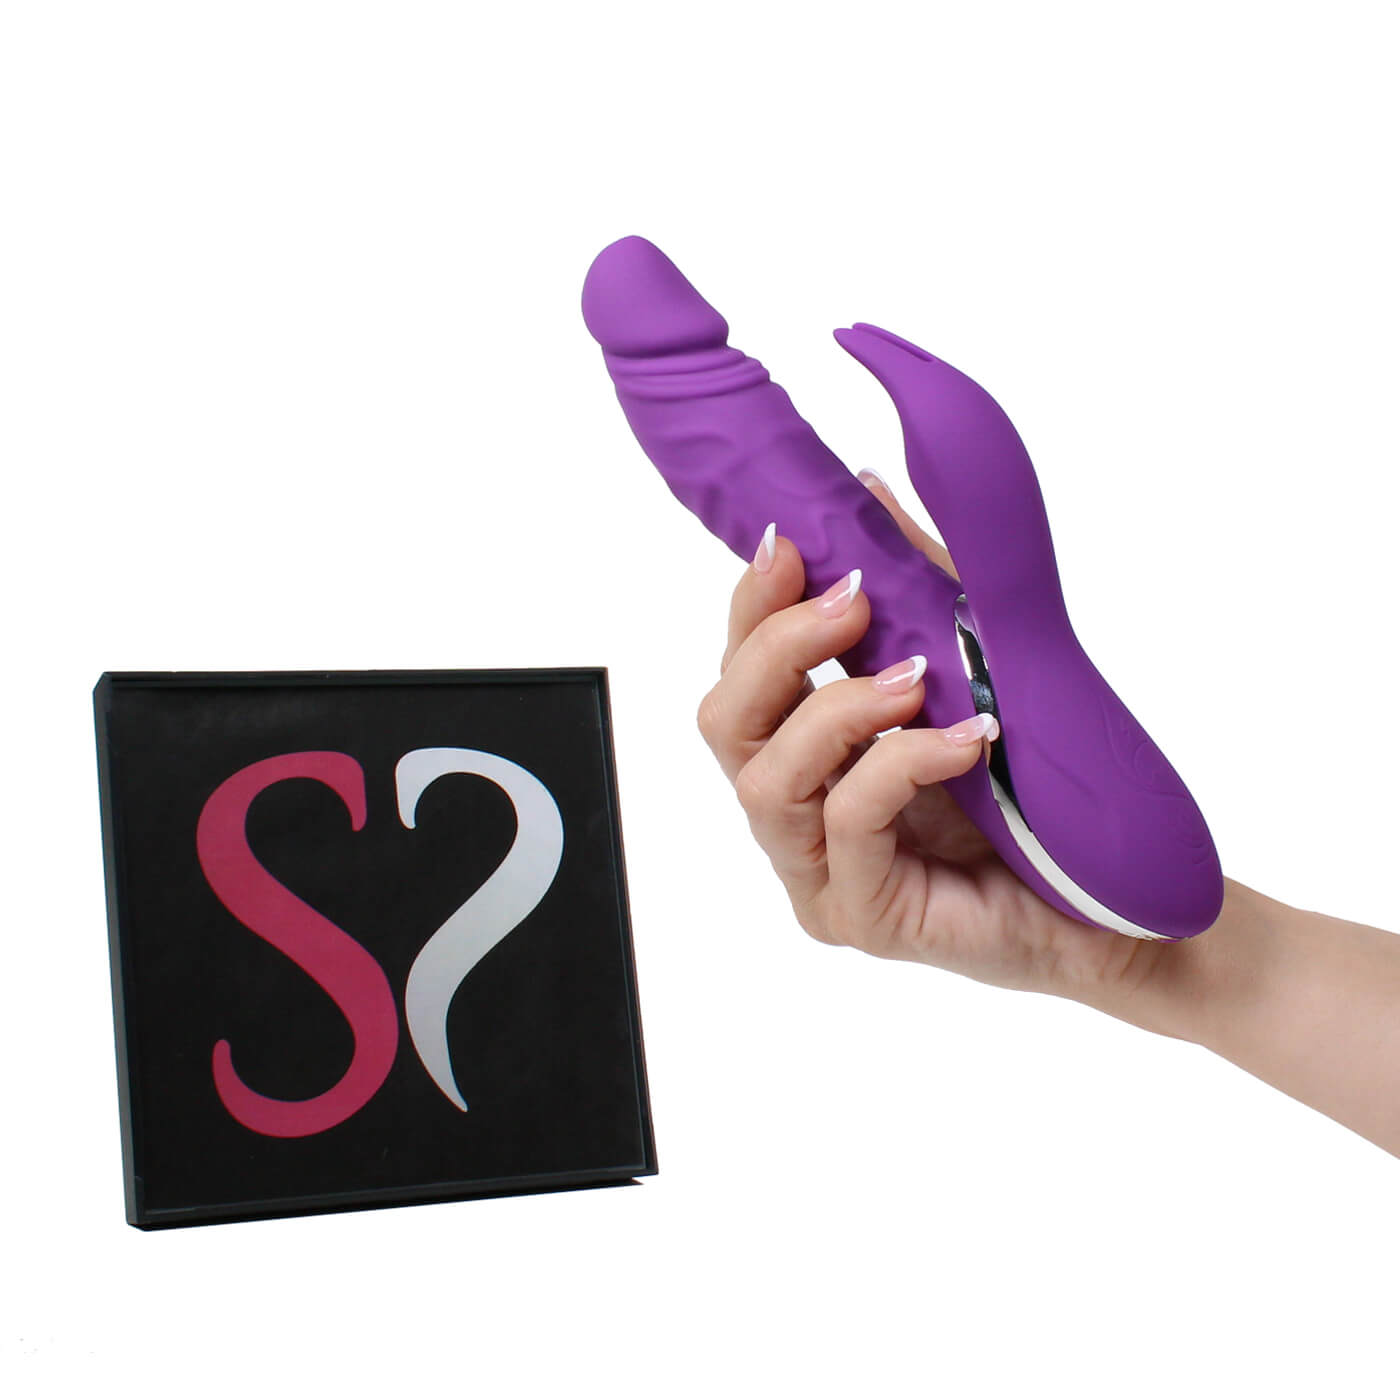 DUALITY 10 Function Rotating Rechargeable Dual Motor Realistic G-Spot Rabbit Vibrator